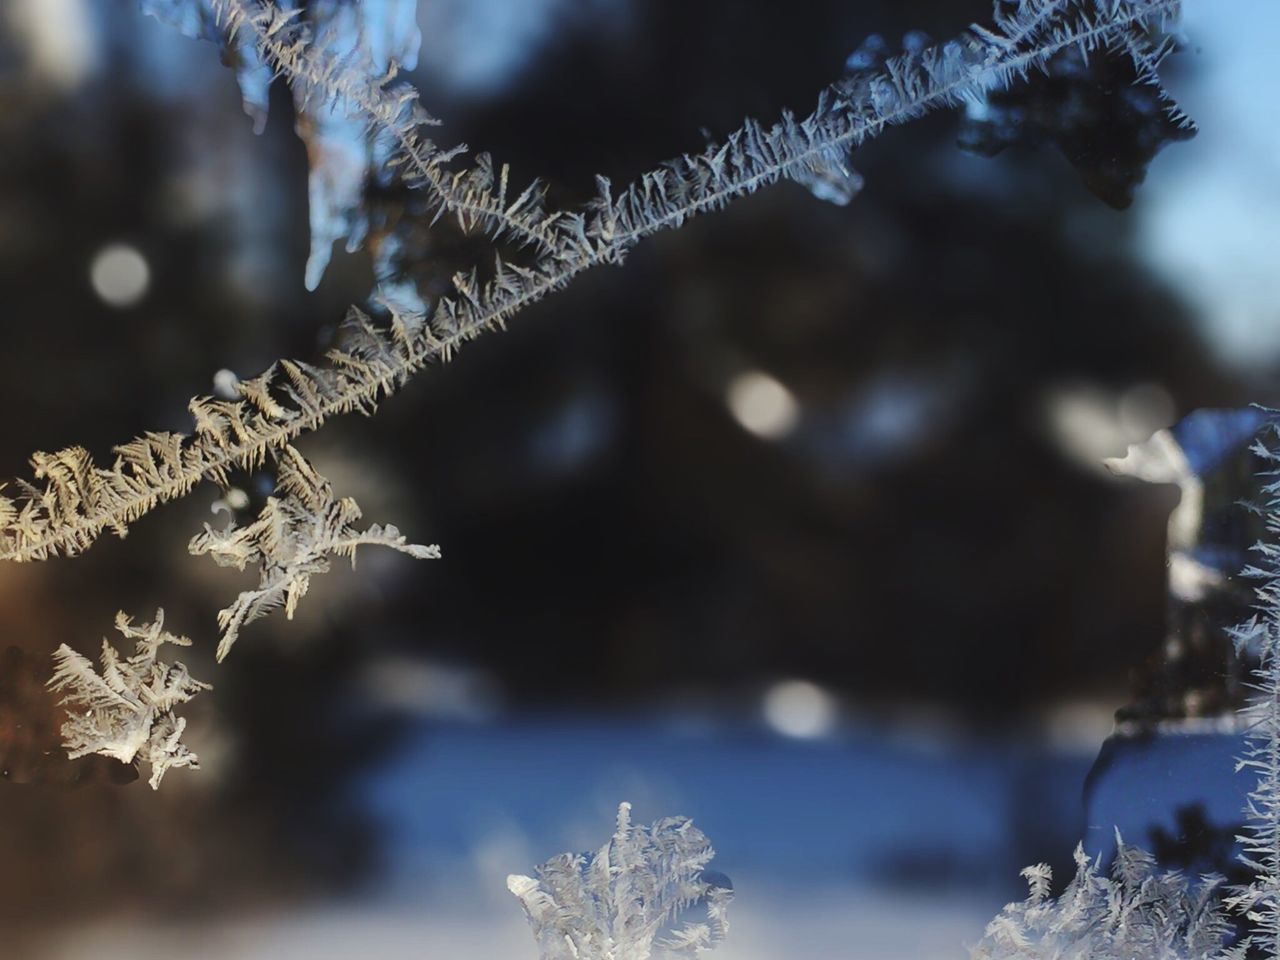 branch, growth, focus on foreground, tree, flower, nature, close-up, beauty in nature, winter, plant, cold temperature, fragility, freshness, snow, twig, selective focus, season, tranquility, stem, frozen